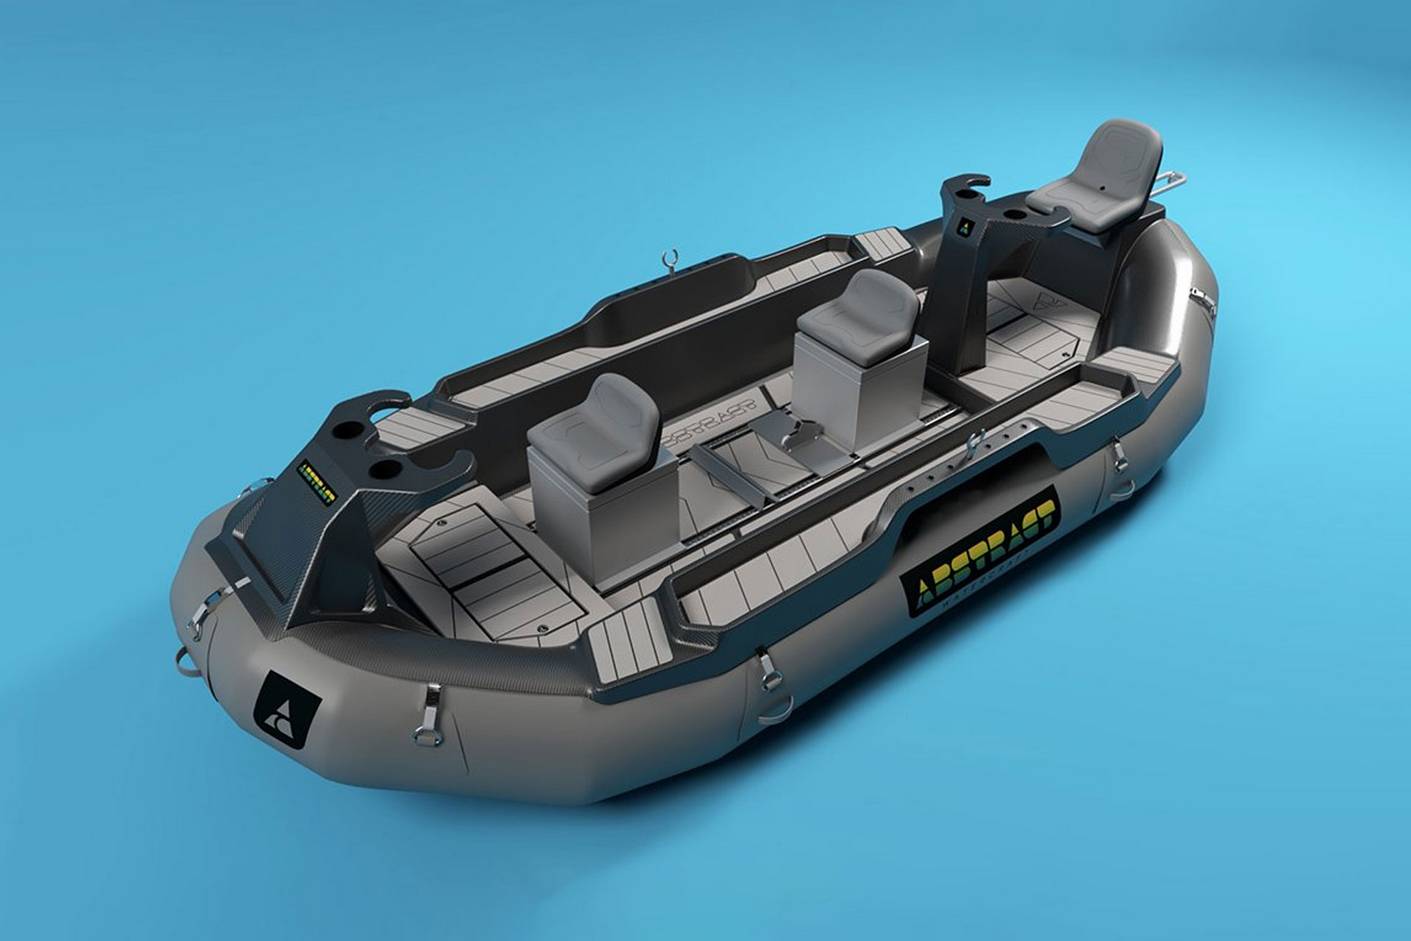 Abstract Watercraft Model 1 Inflatable Boat (7)